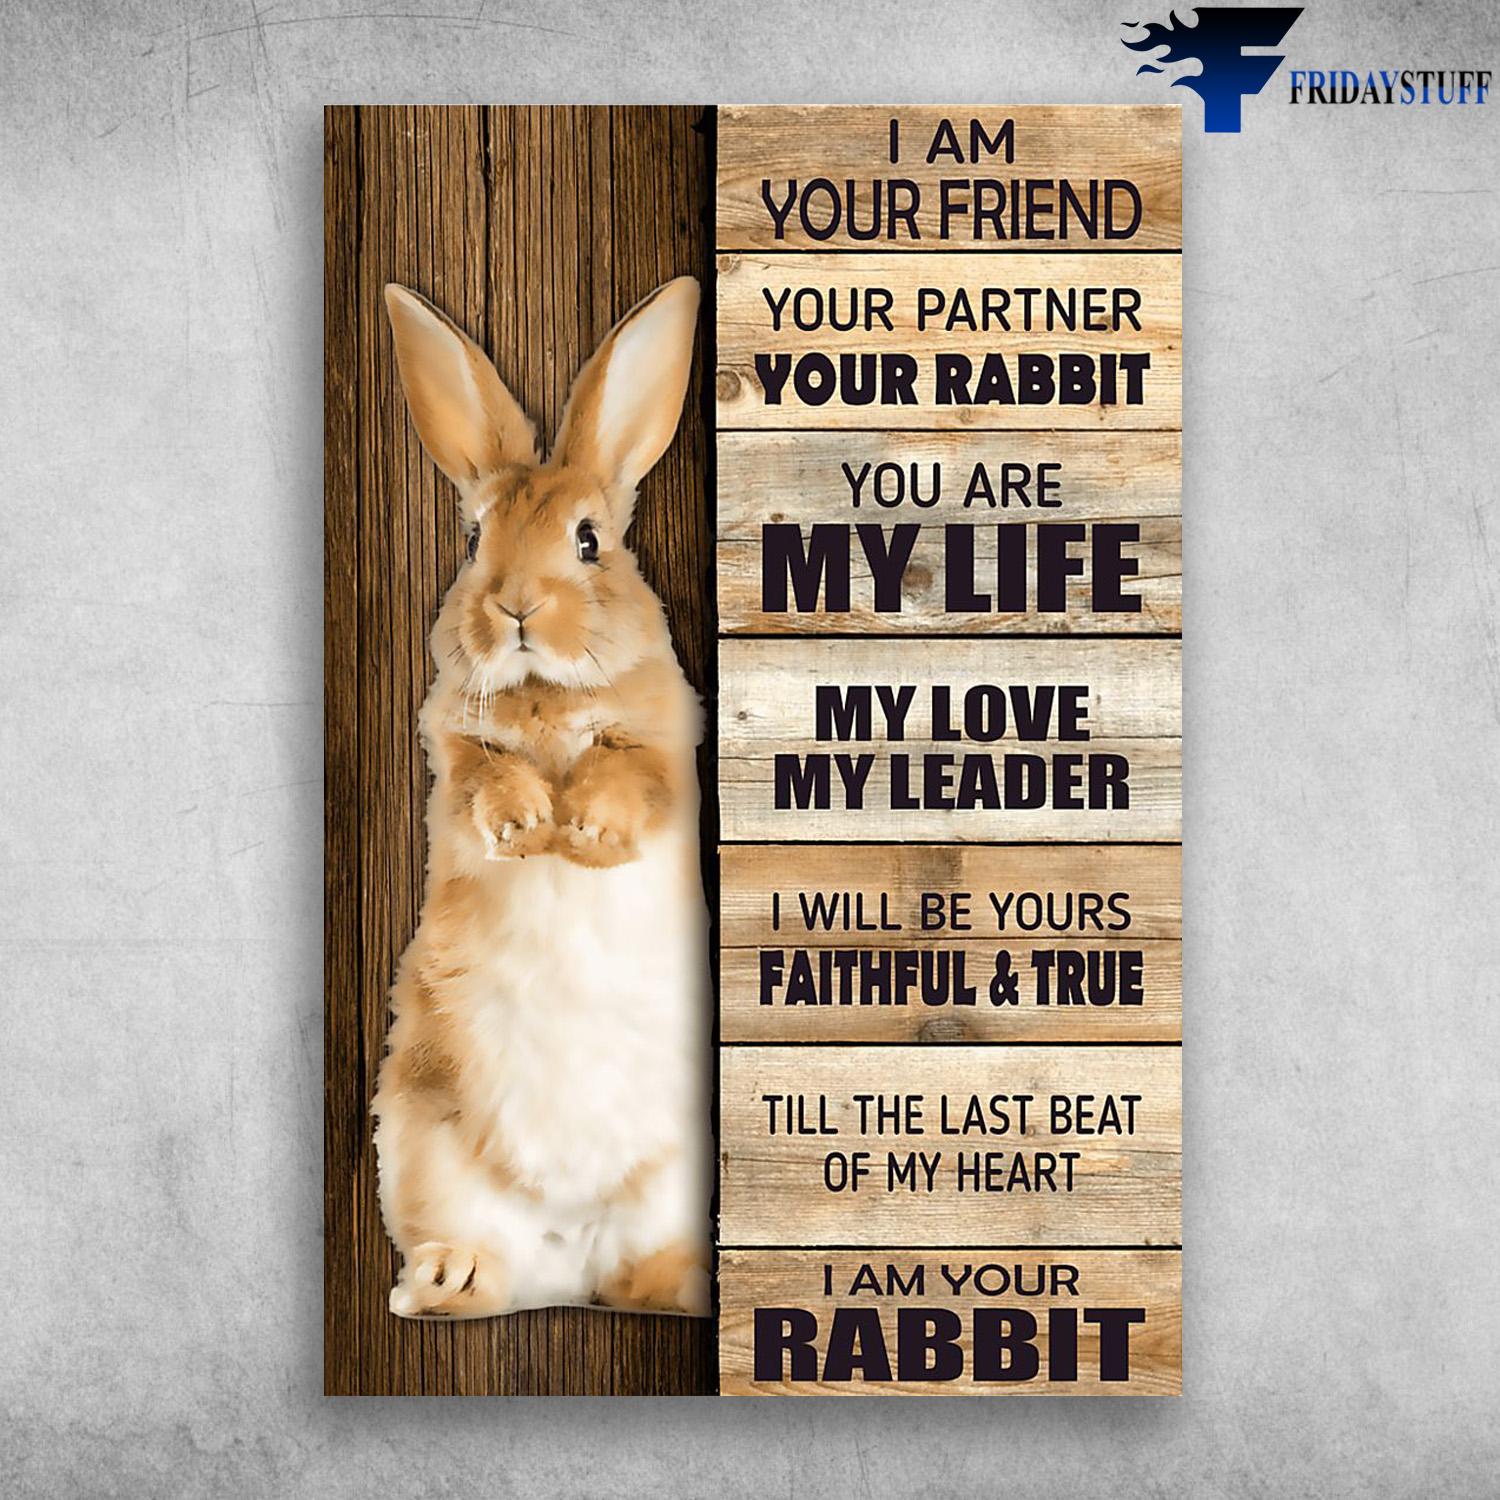 The Rabbit - I Am Your Friend, Your Partner, Your Rabbit, You Are My Life, My Love, My Leader, I Will Be Yours Faithful And True, Till The Last Beat Of My Heart, I Am Your Rabbit